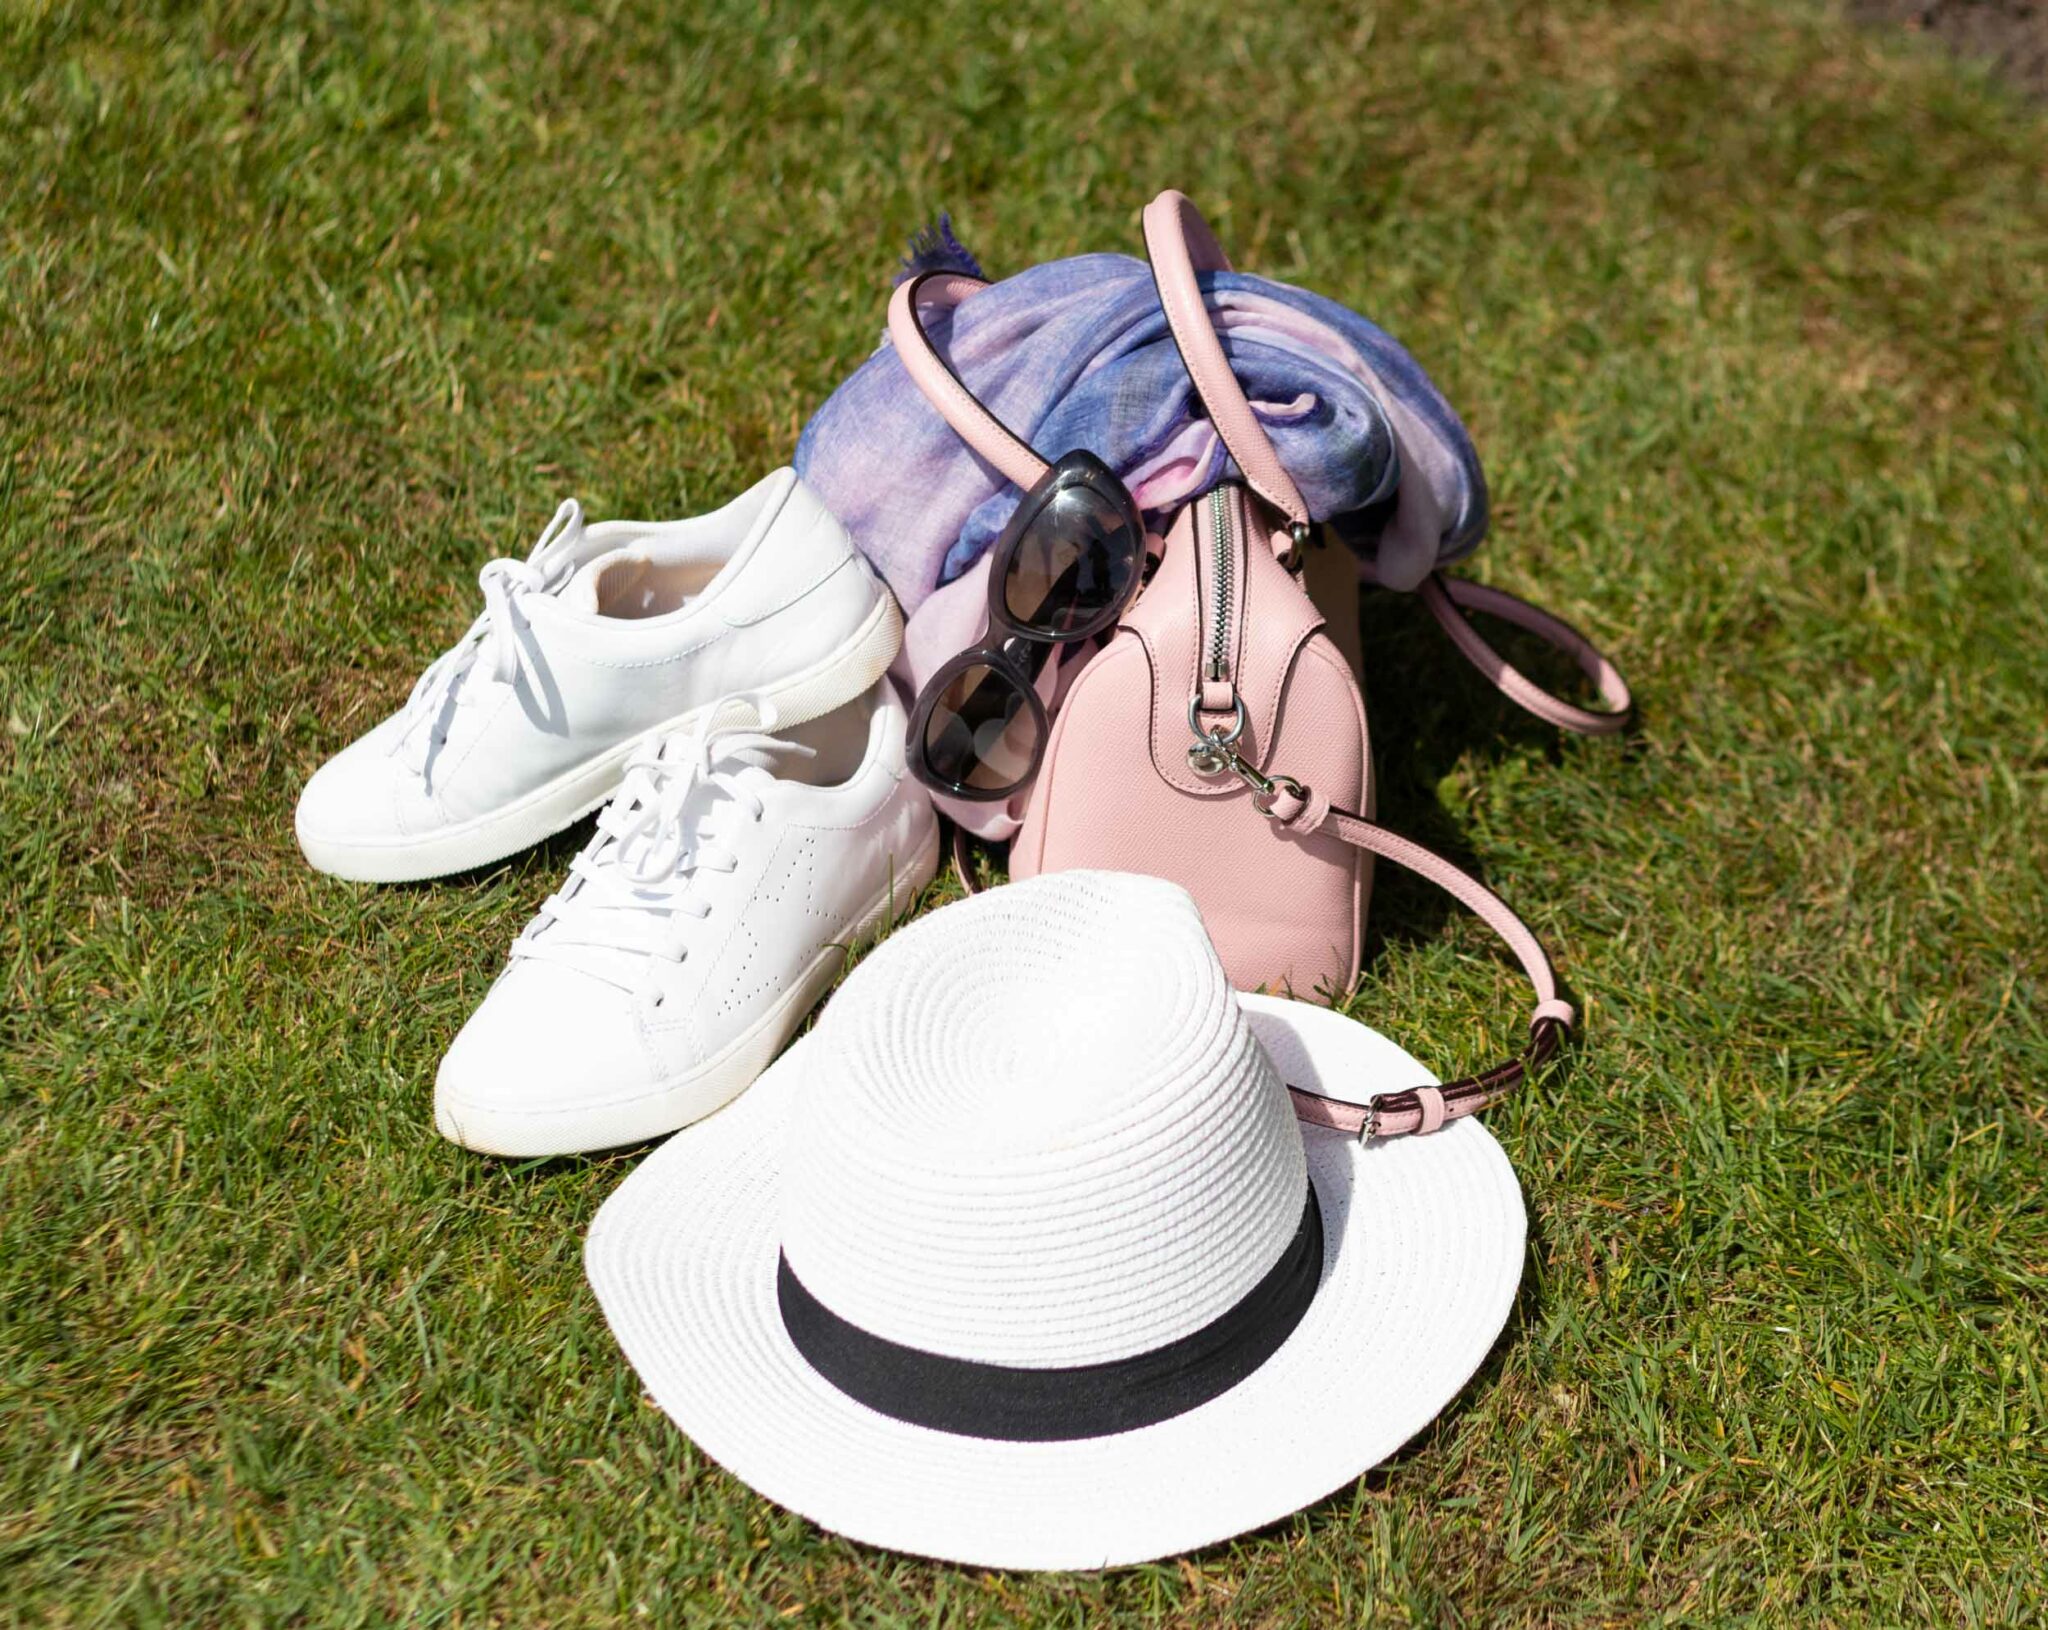 Pavers white trainers, white hat, pink bag and scarf